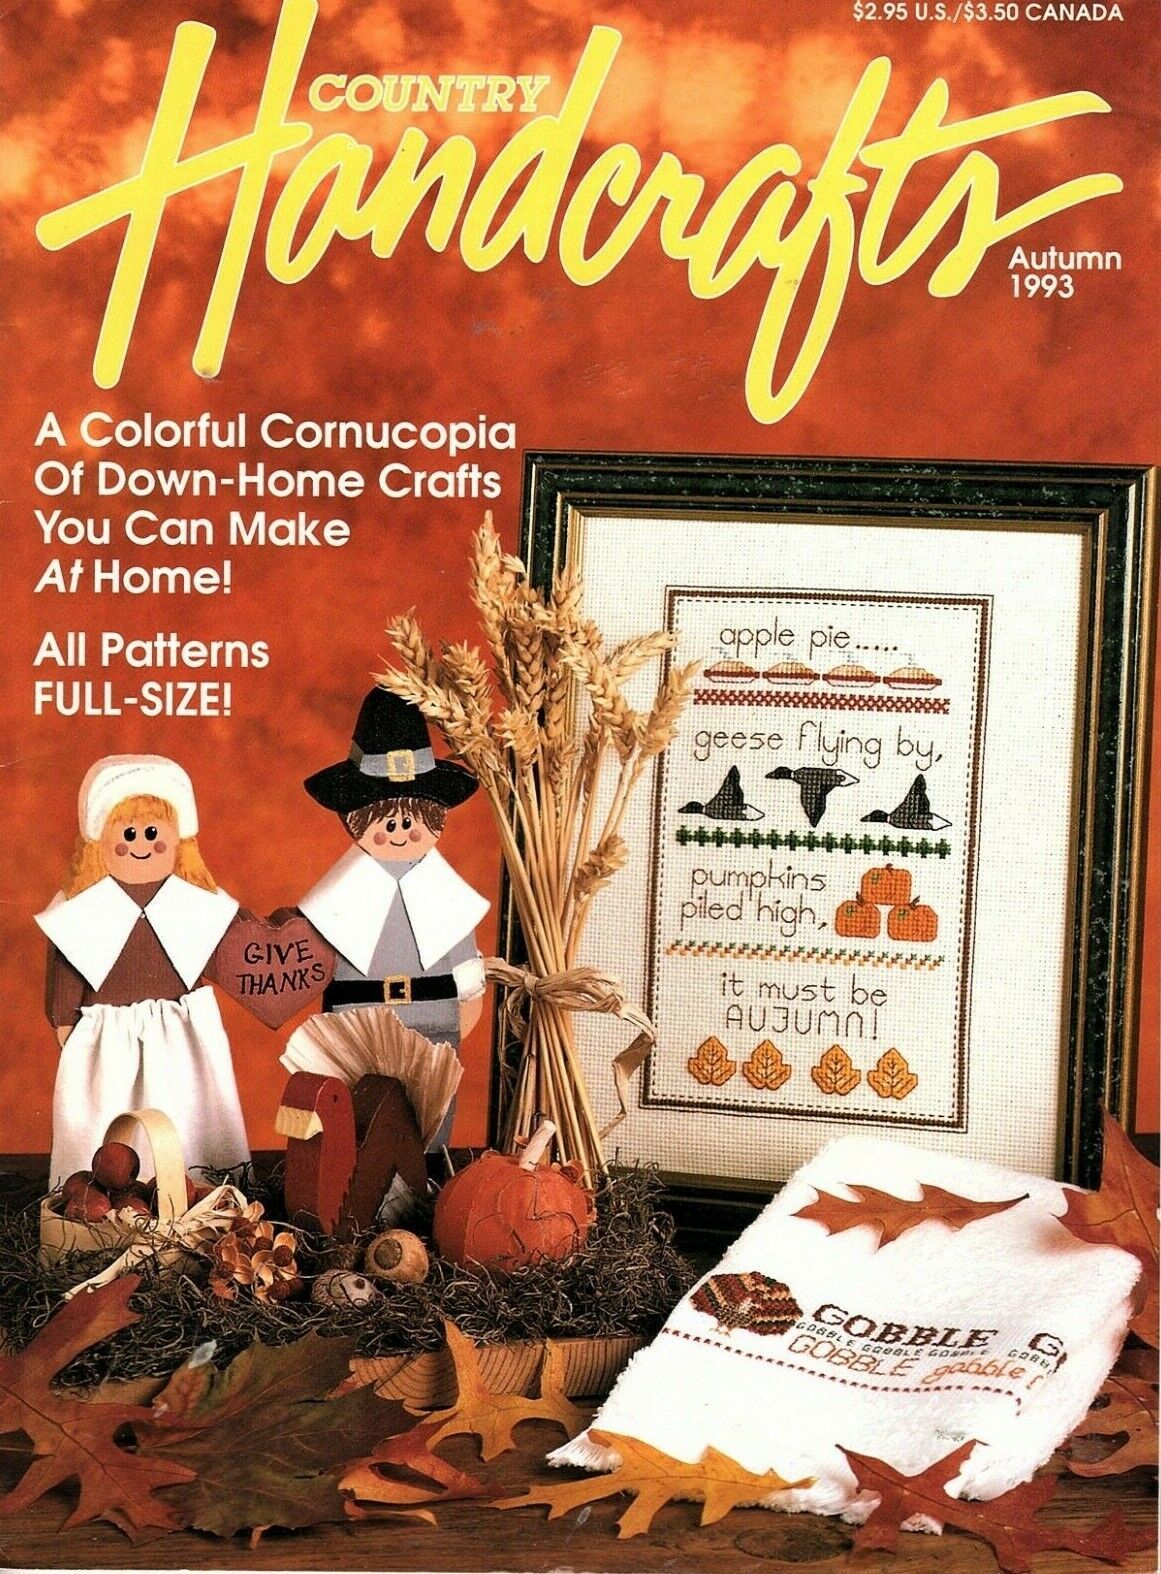 Country Handcrafts Magazine Autumn 1993 With Full Size Patterns - $7.39